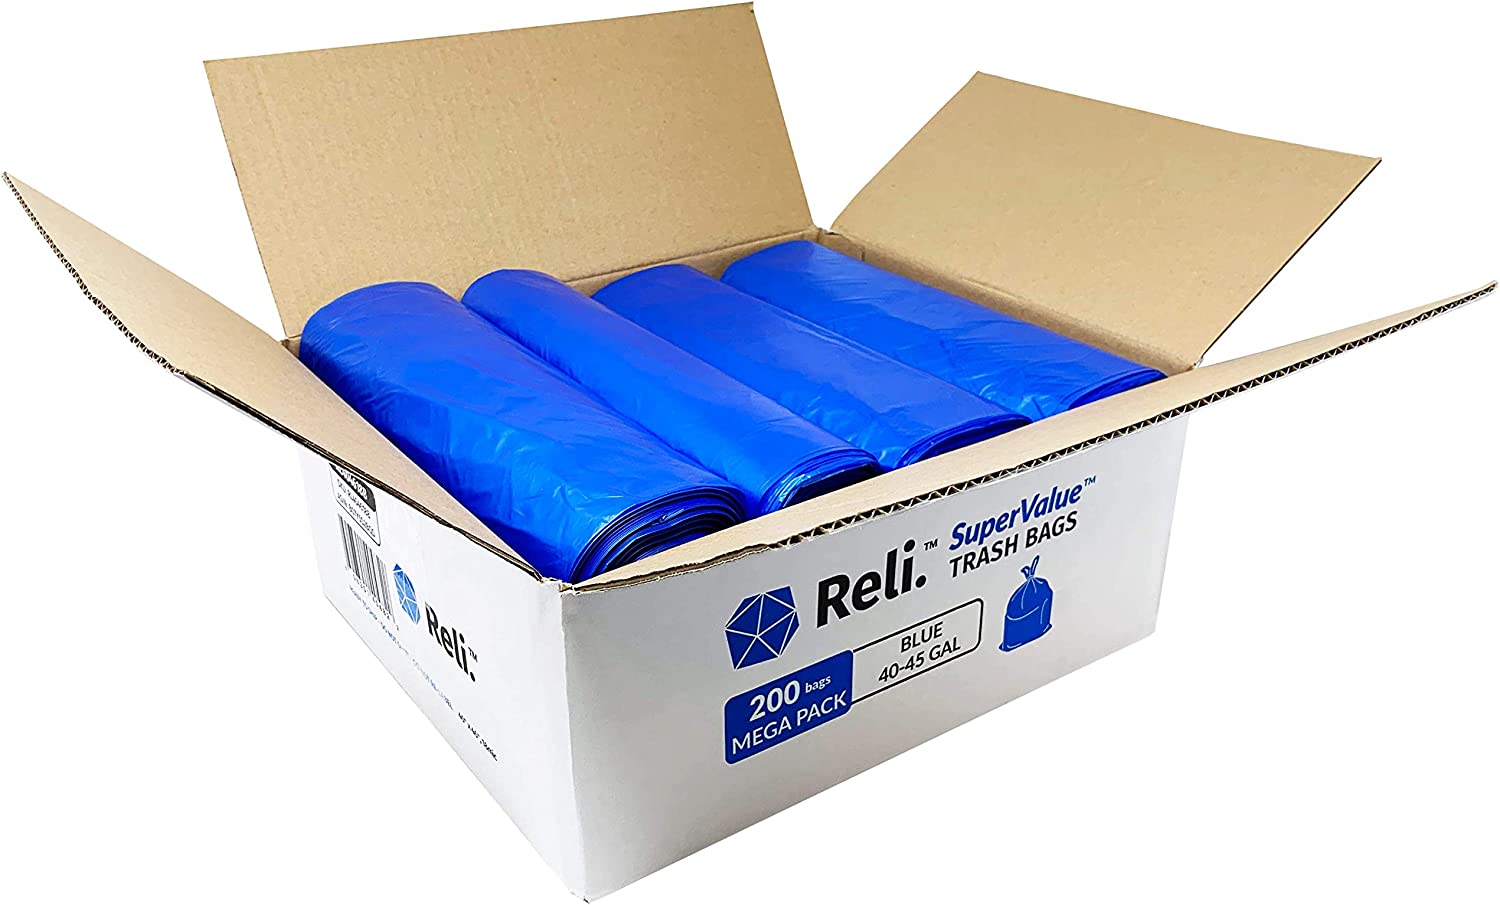 Reli. SuperValue 40-45 Gallon Trash Bags | 250 Count | Made in USA | Heavy  Duty | Bulk | Clear Multi-Use Garbage Bags